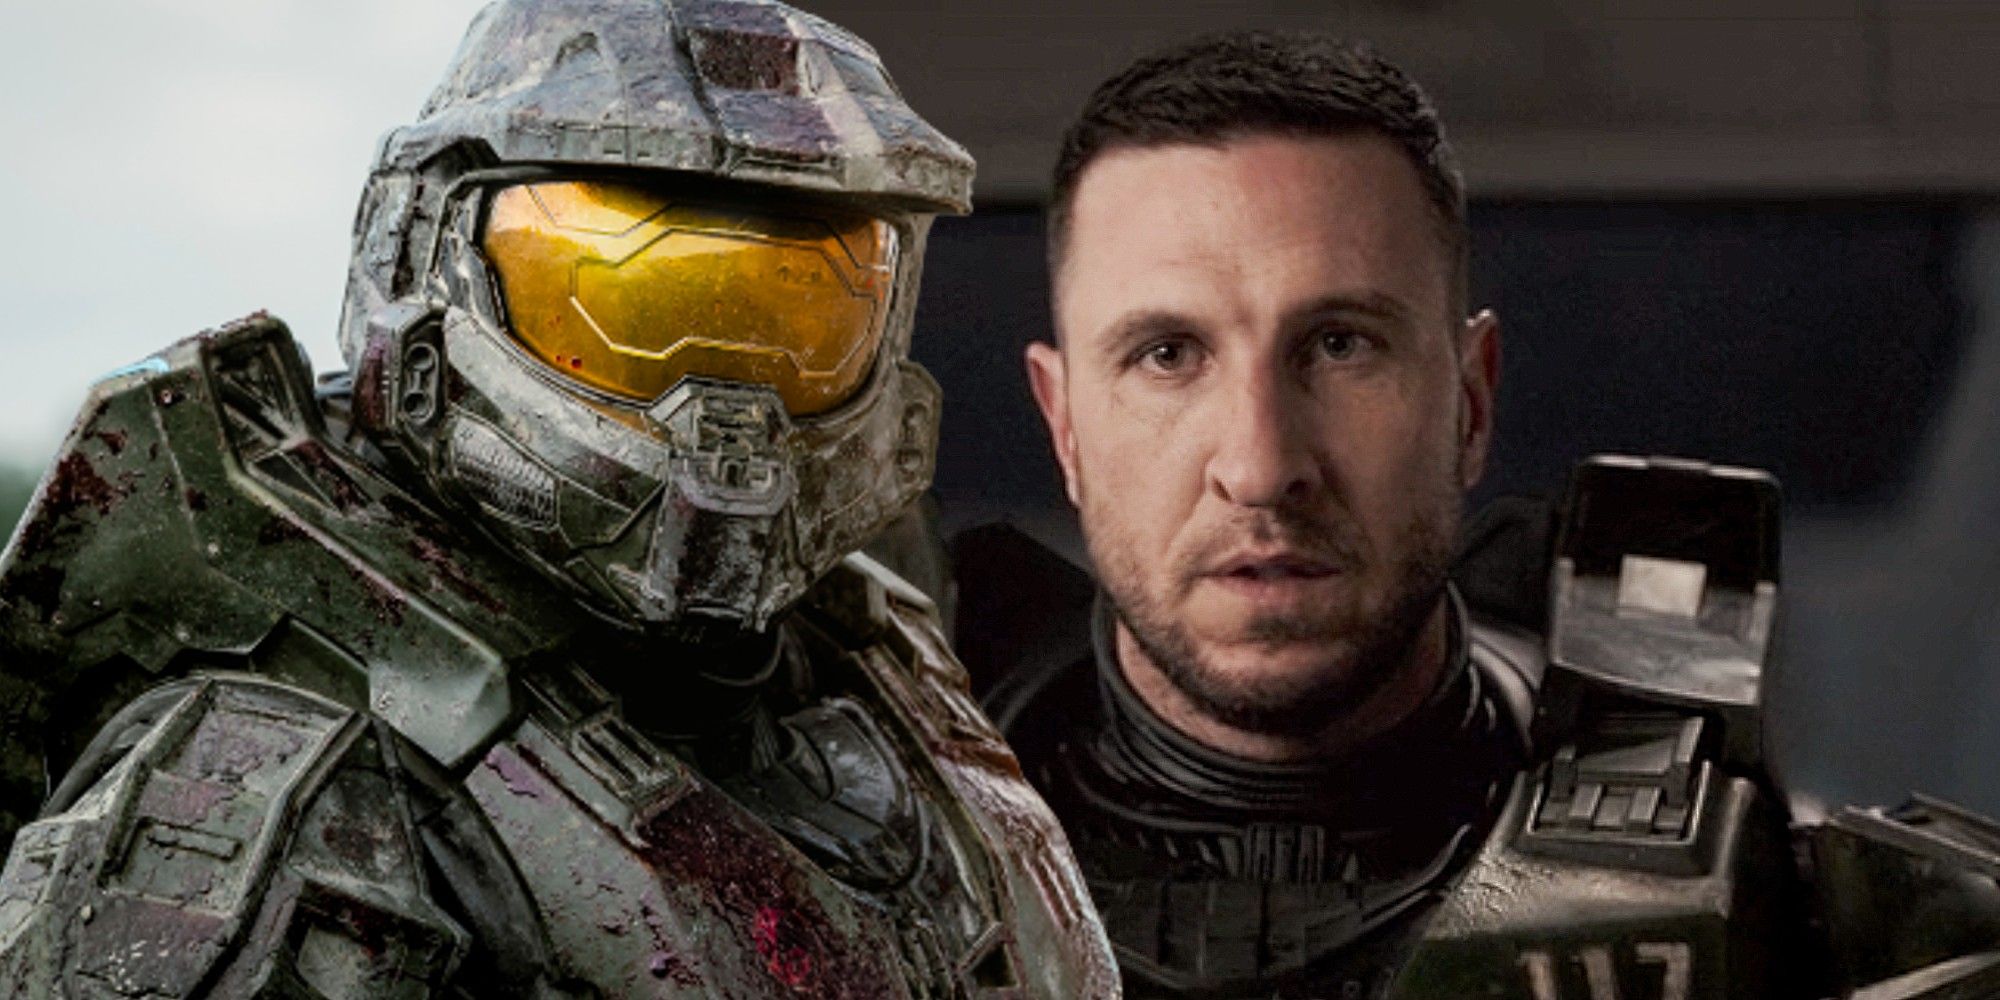 Halo Is Better As A TV Show Than Movie, Says Master Chief Actor